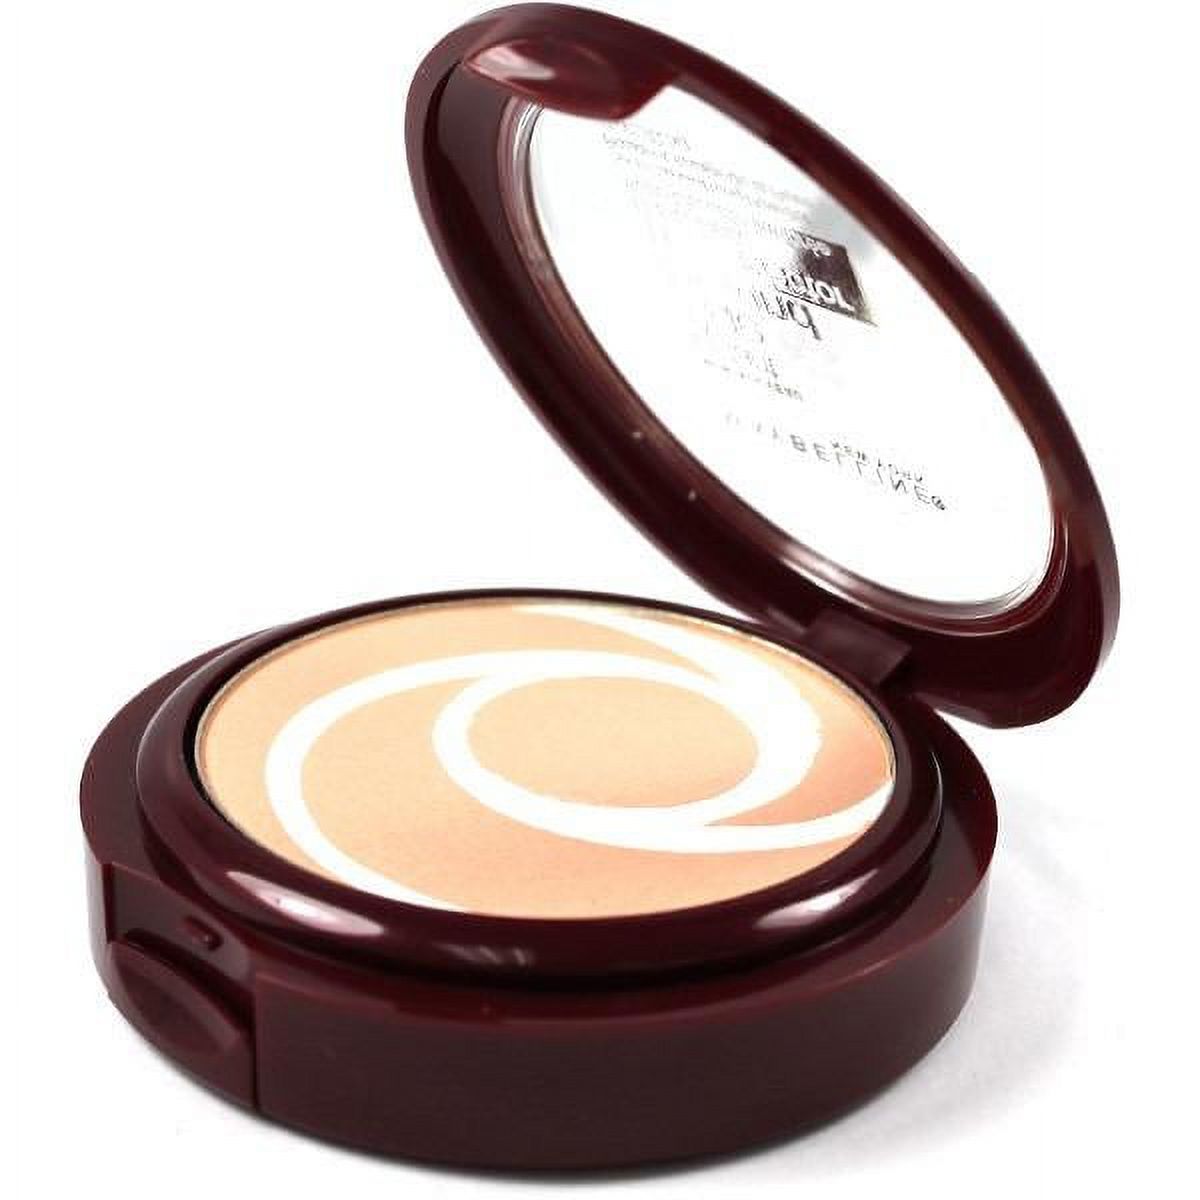 Maybelline Instant Age Rewind The Perfector Primer Powder, Light - image 3 of 7